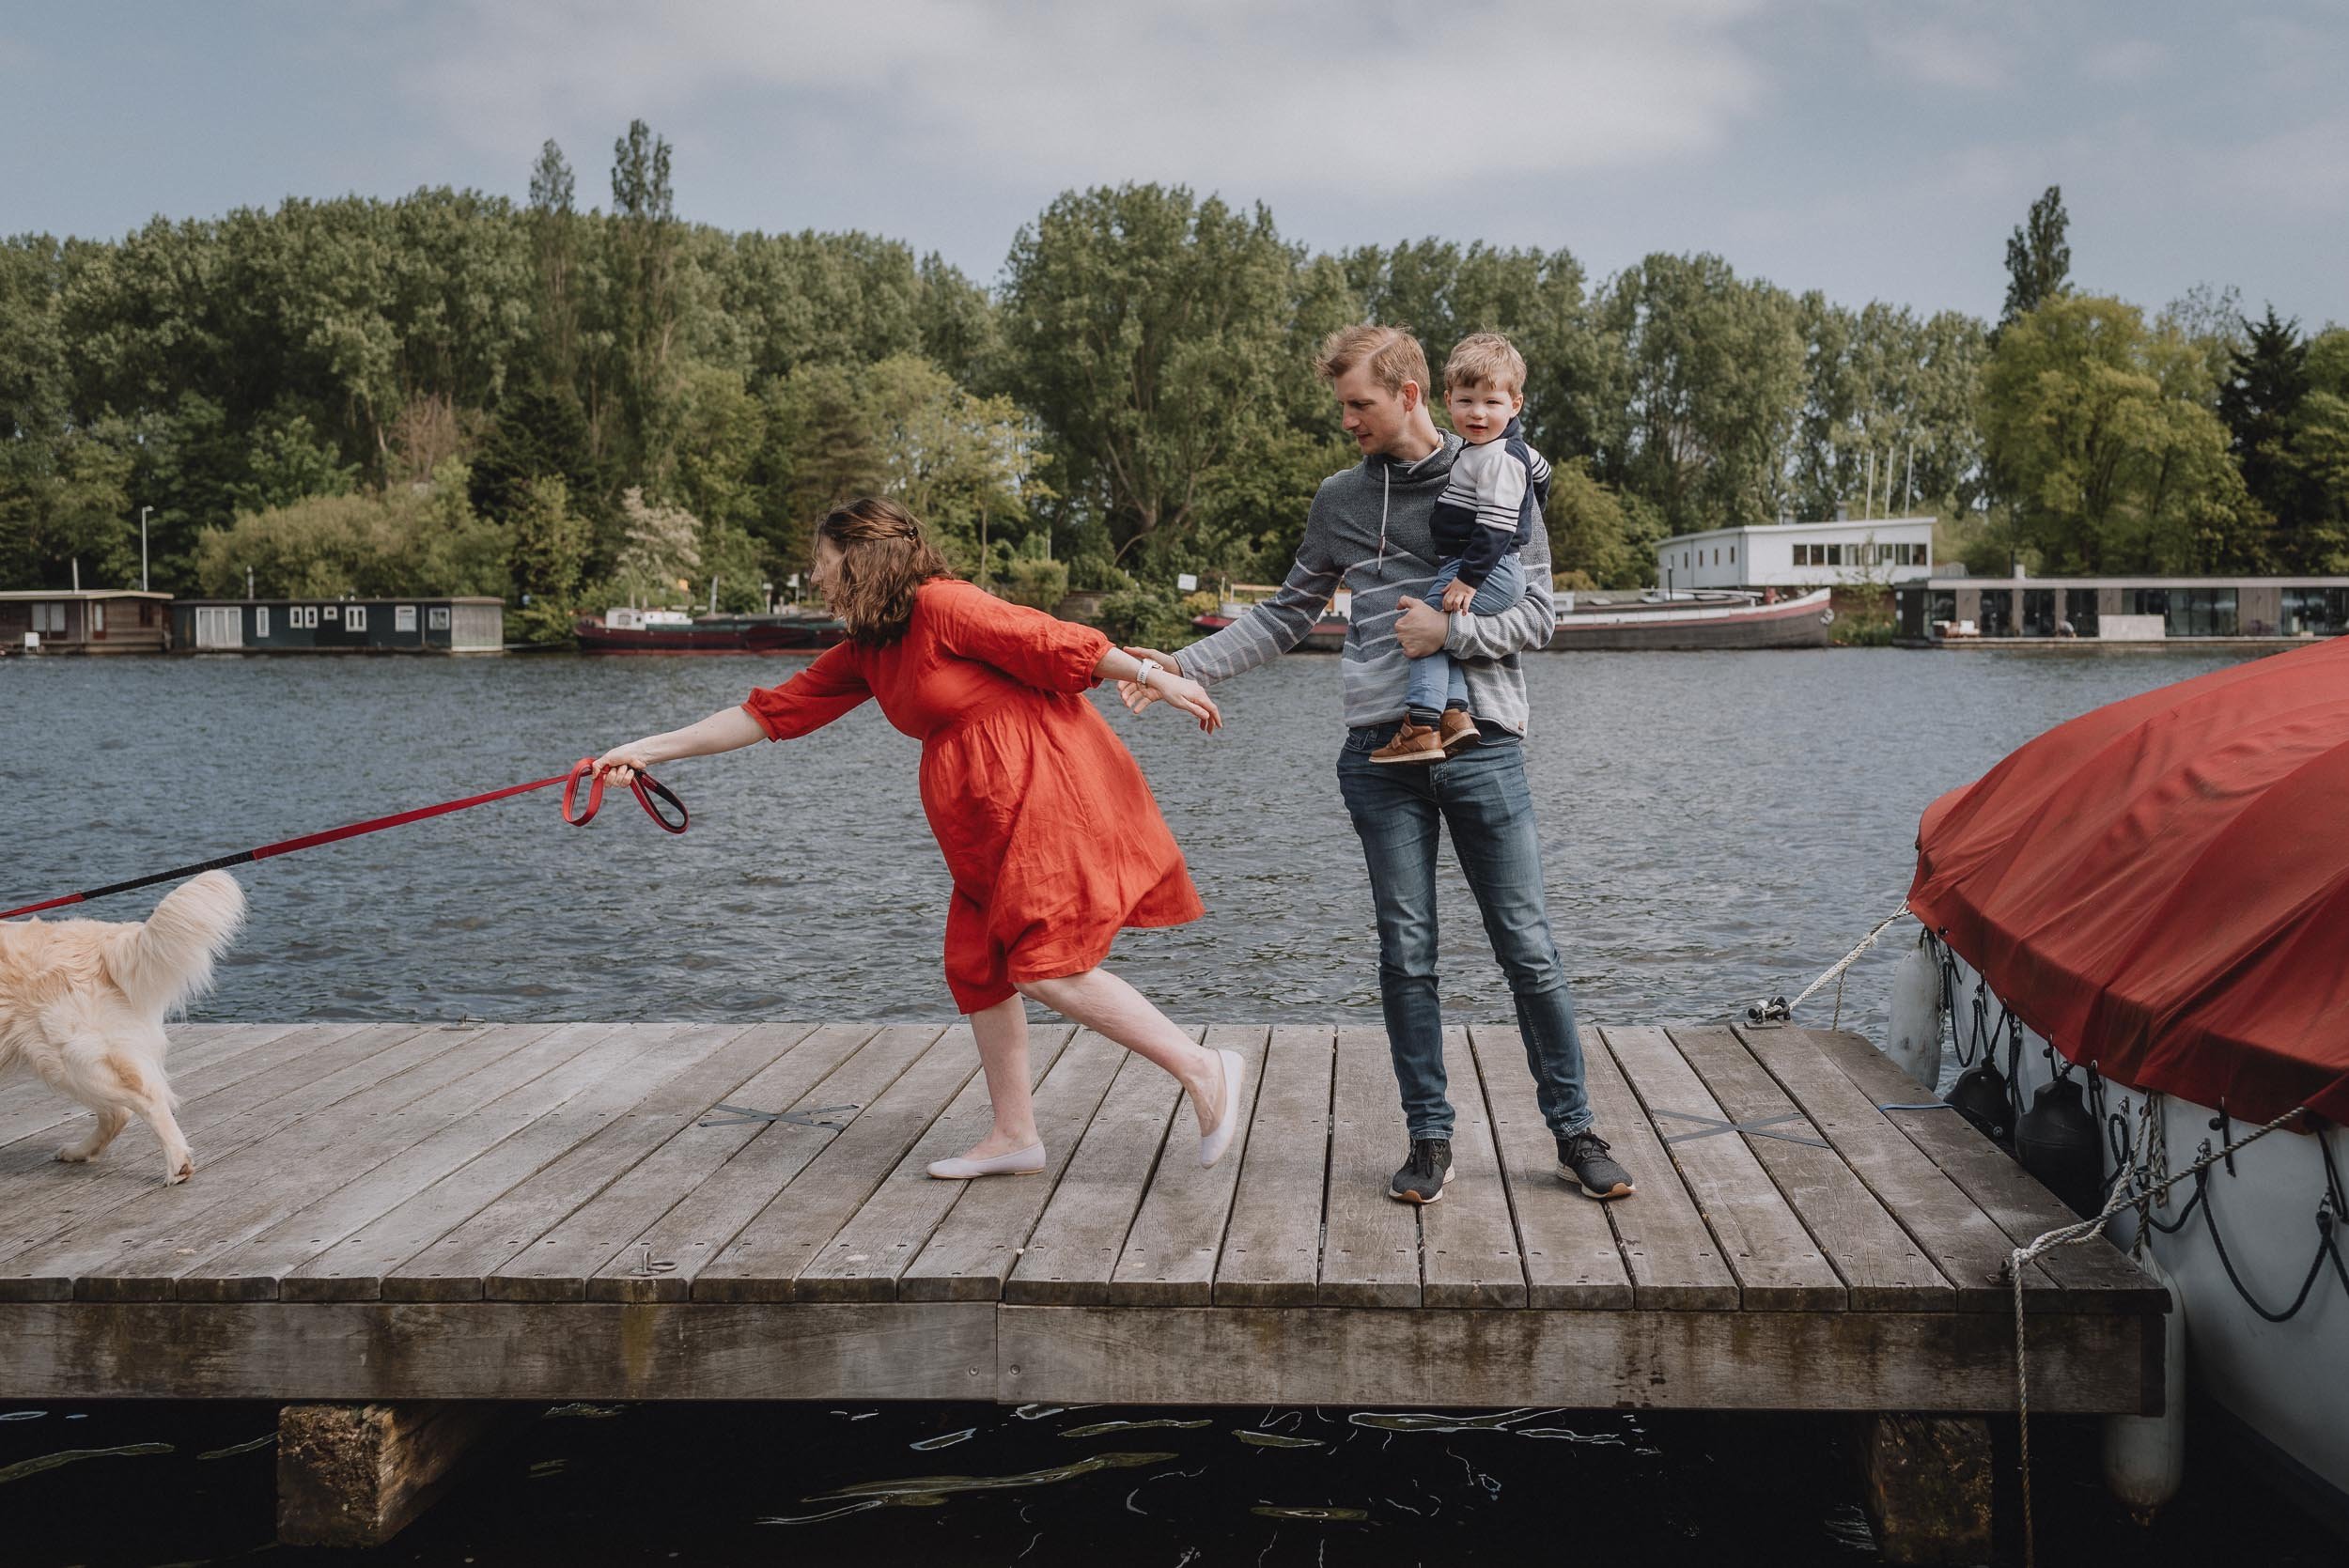 Family Photoshoot in Haarlem/Amsterdam by Vicky McLachlan Photography_best3